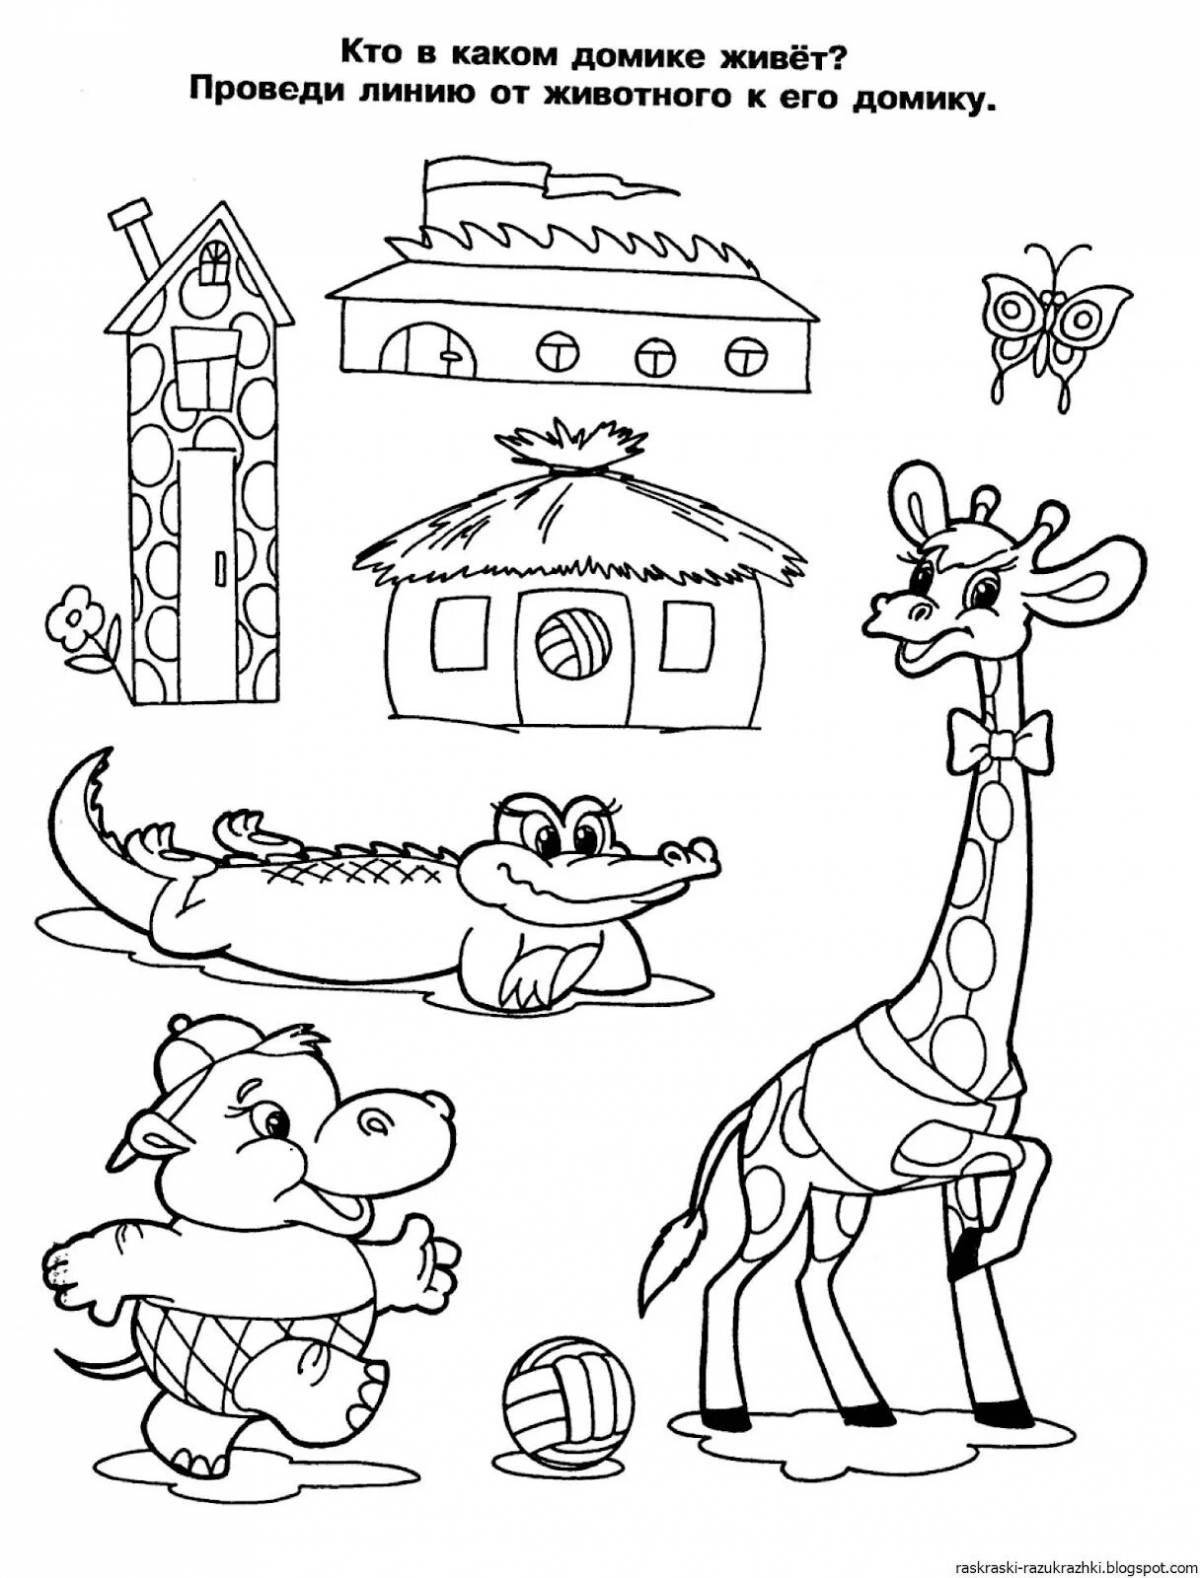 Innovative logical coloring book for children aged 5+